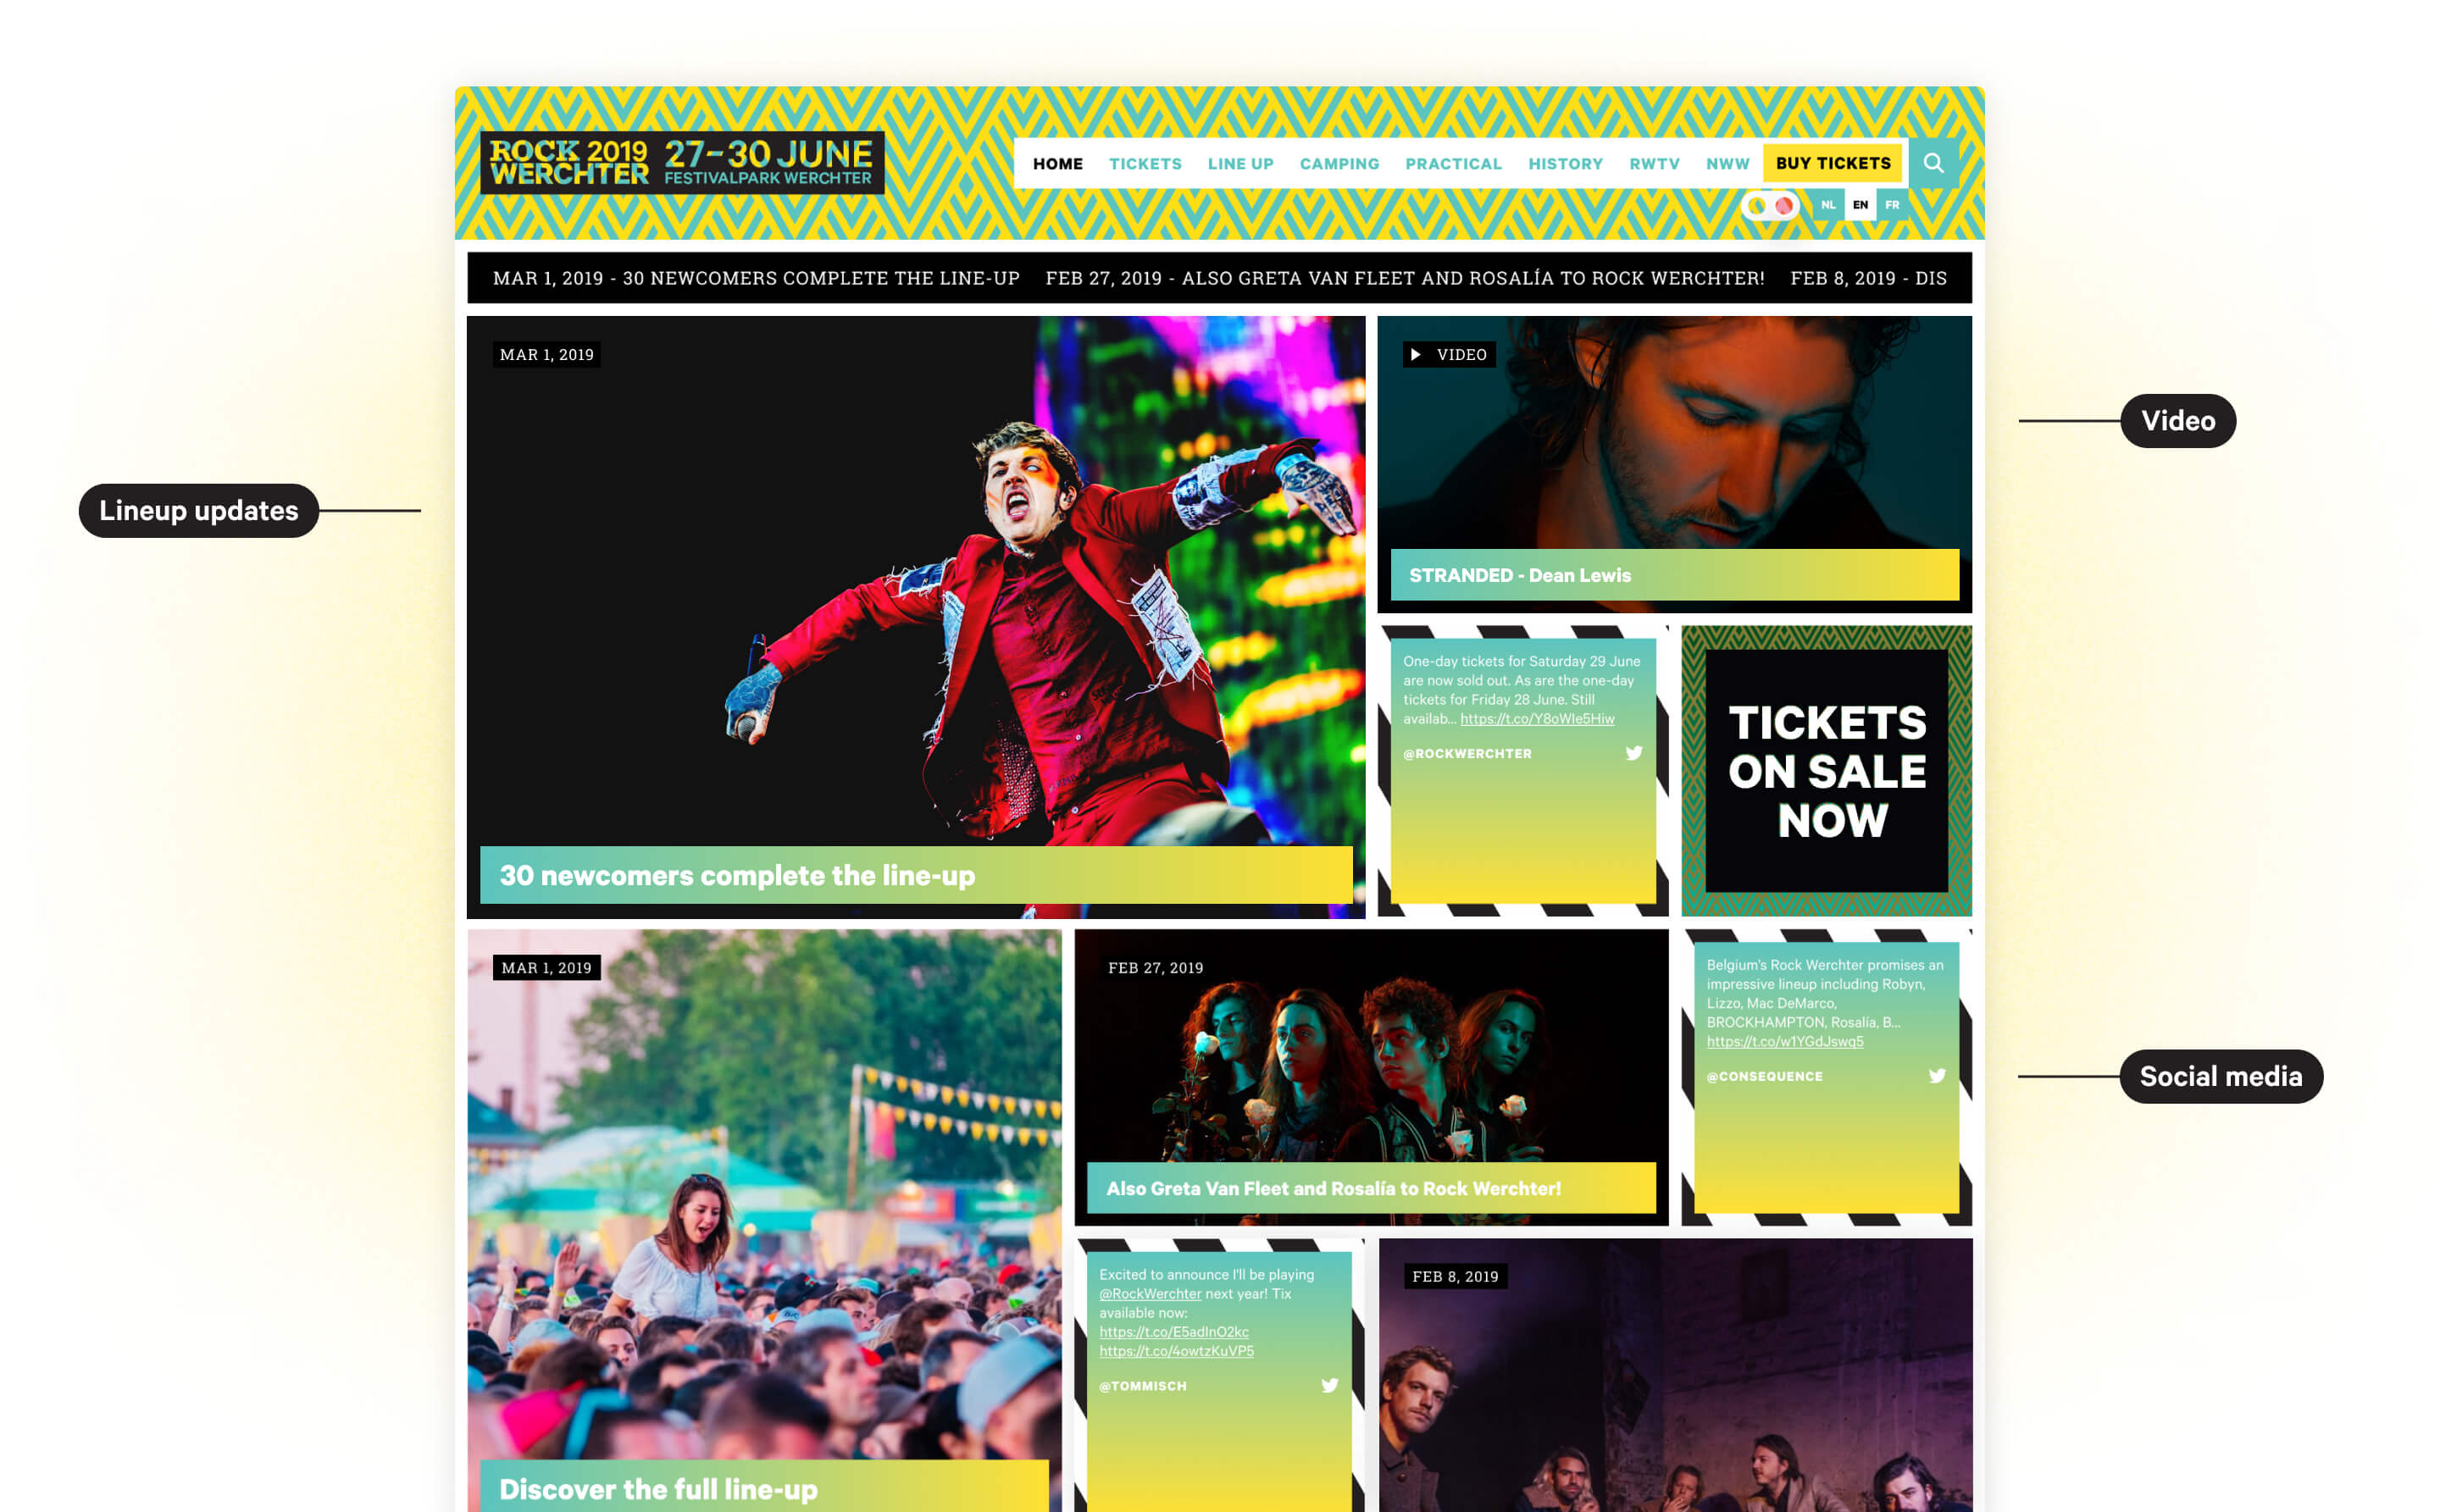 The Rock Werchter homepage indicating all types of content